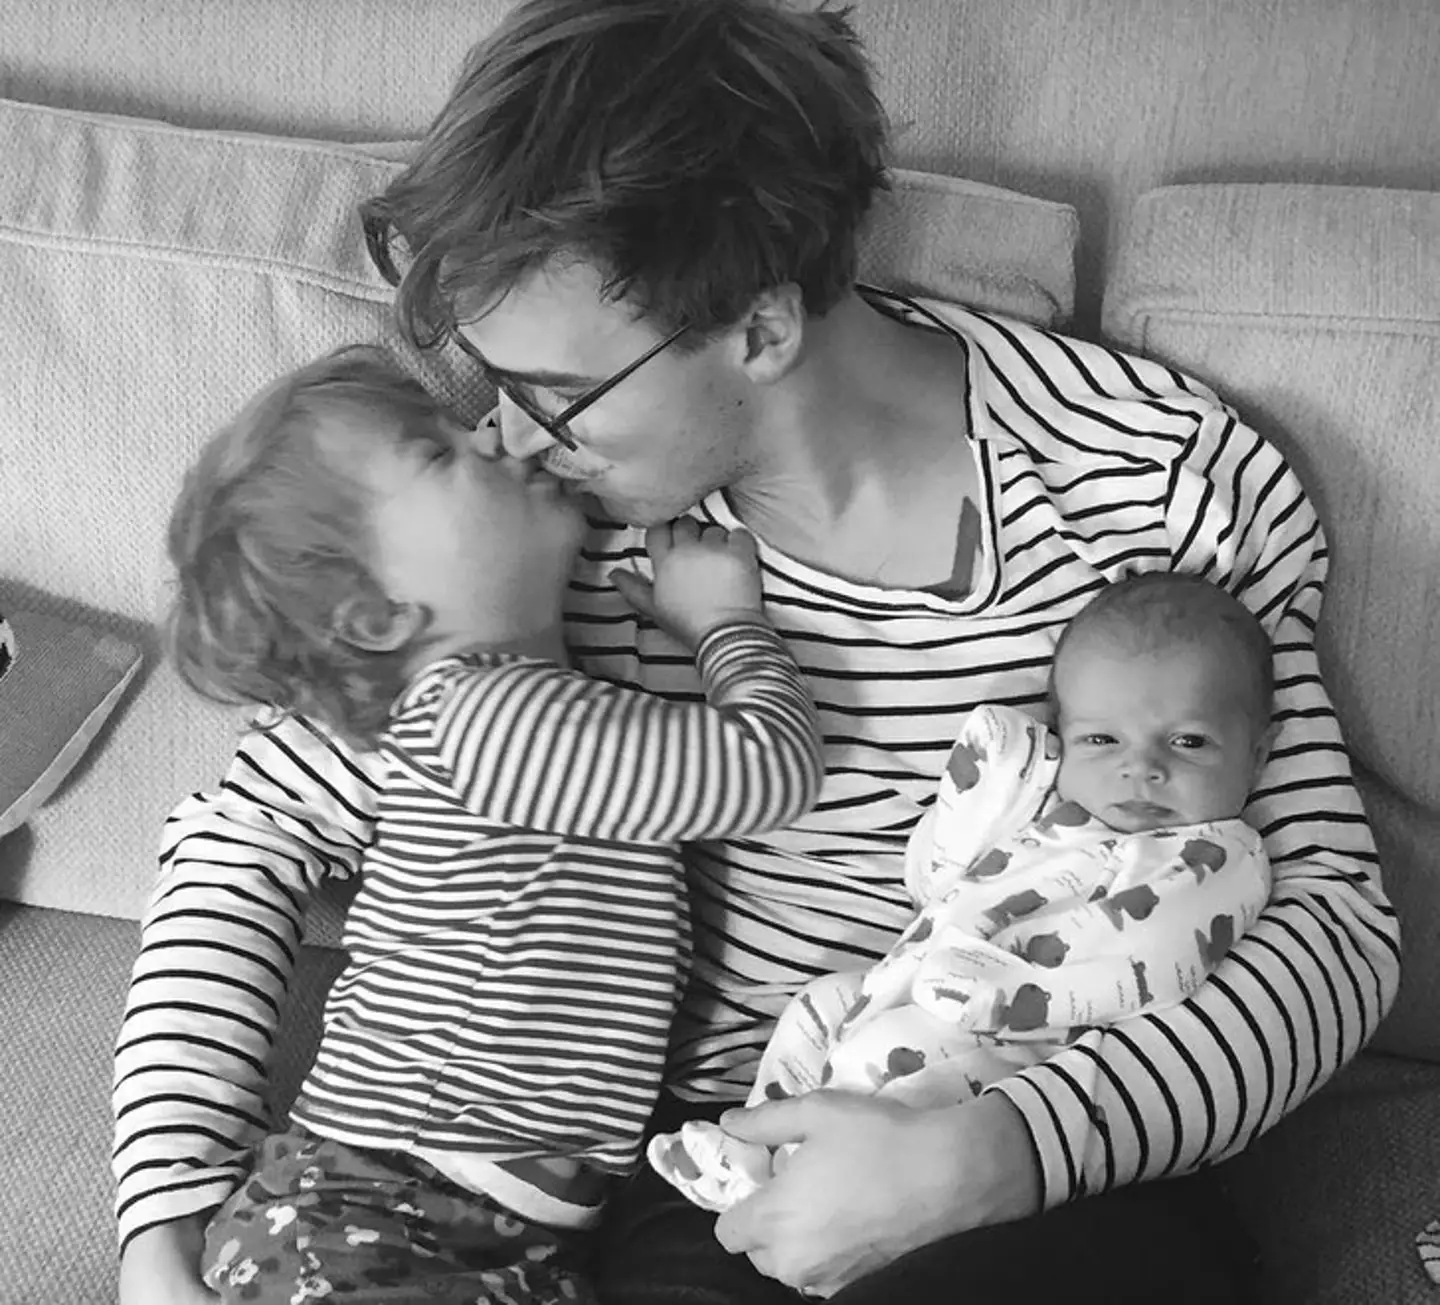 McFly's Tom Fletcher has also been pictured kissing his son.